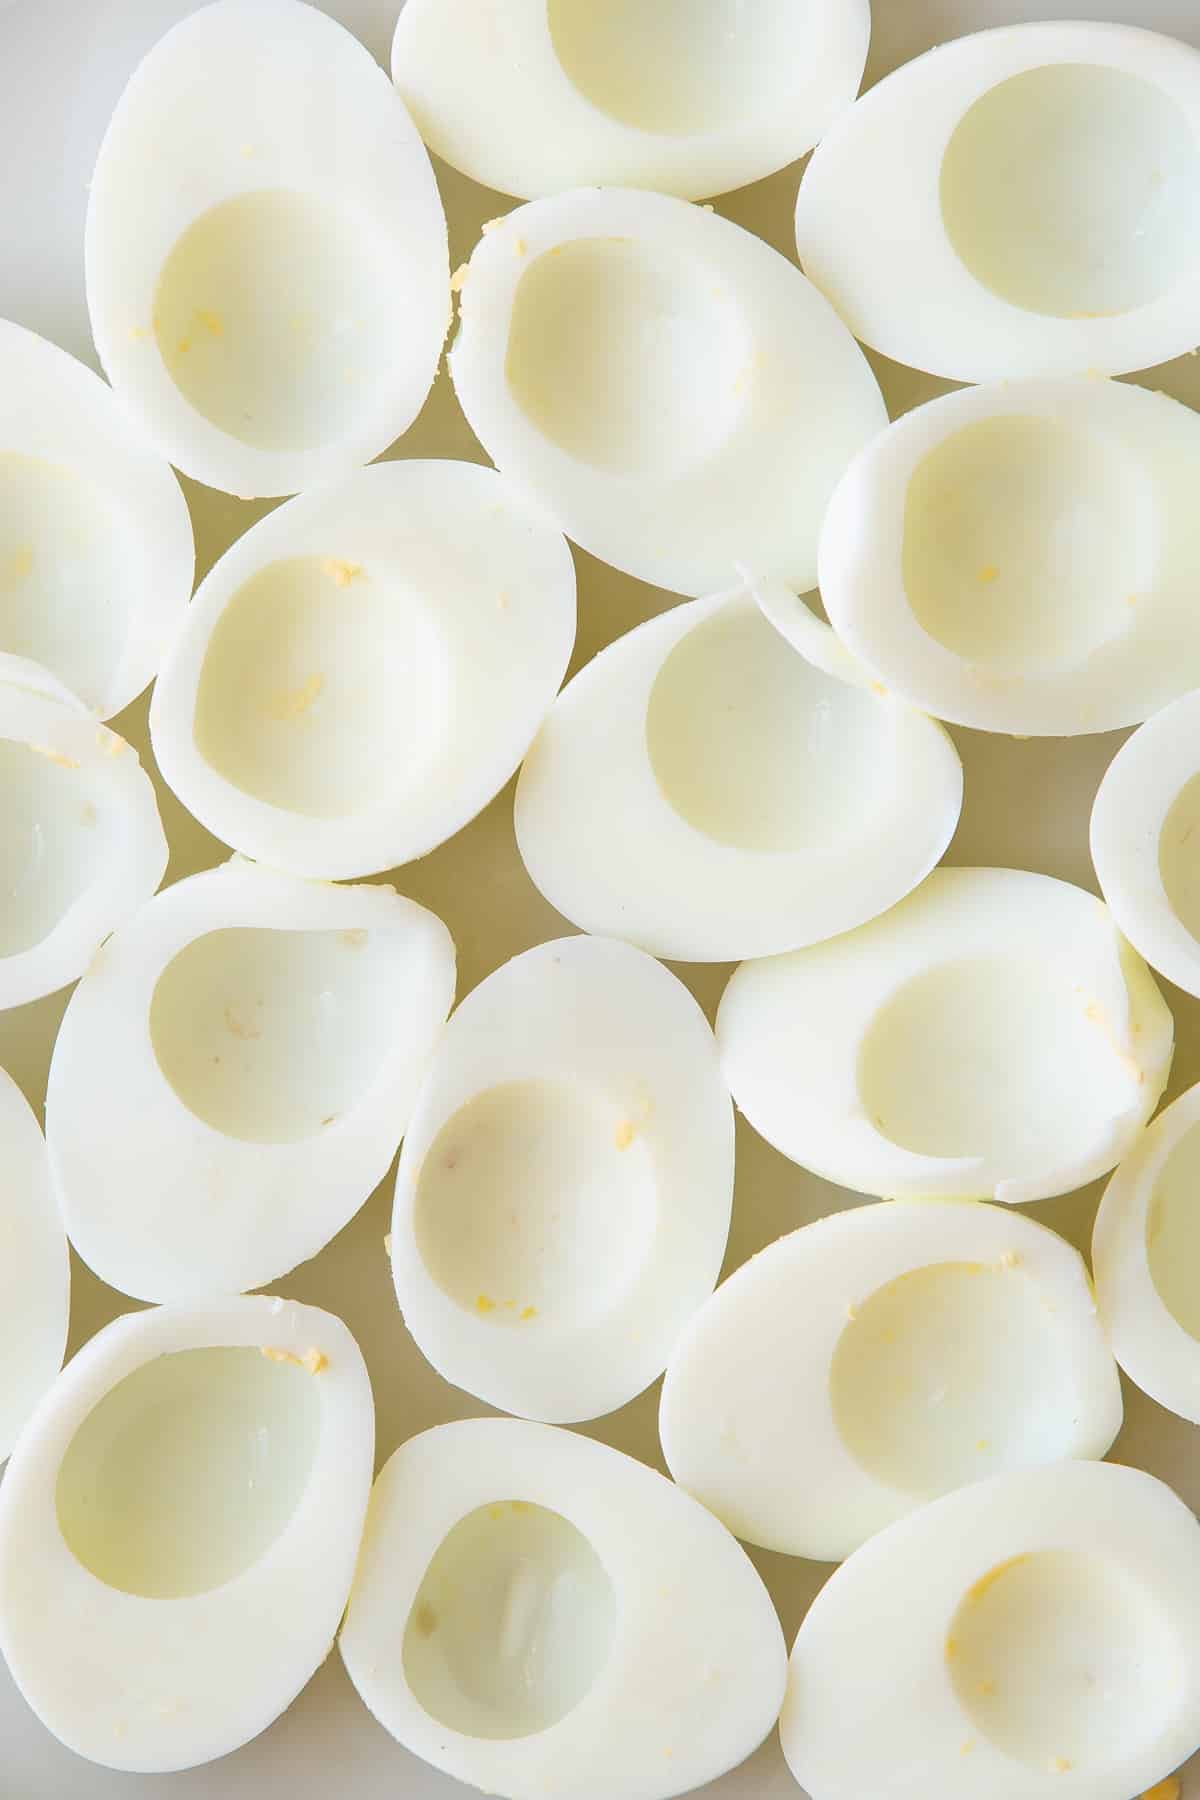 Boiled eggs cut open with the yolk removed.